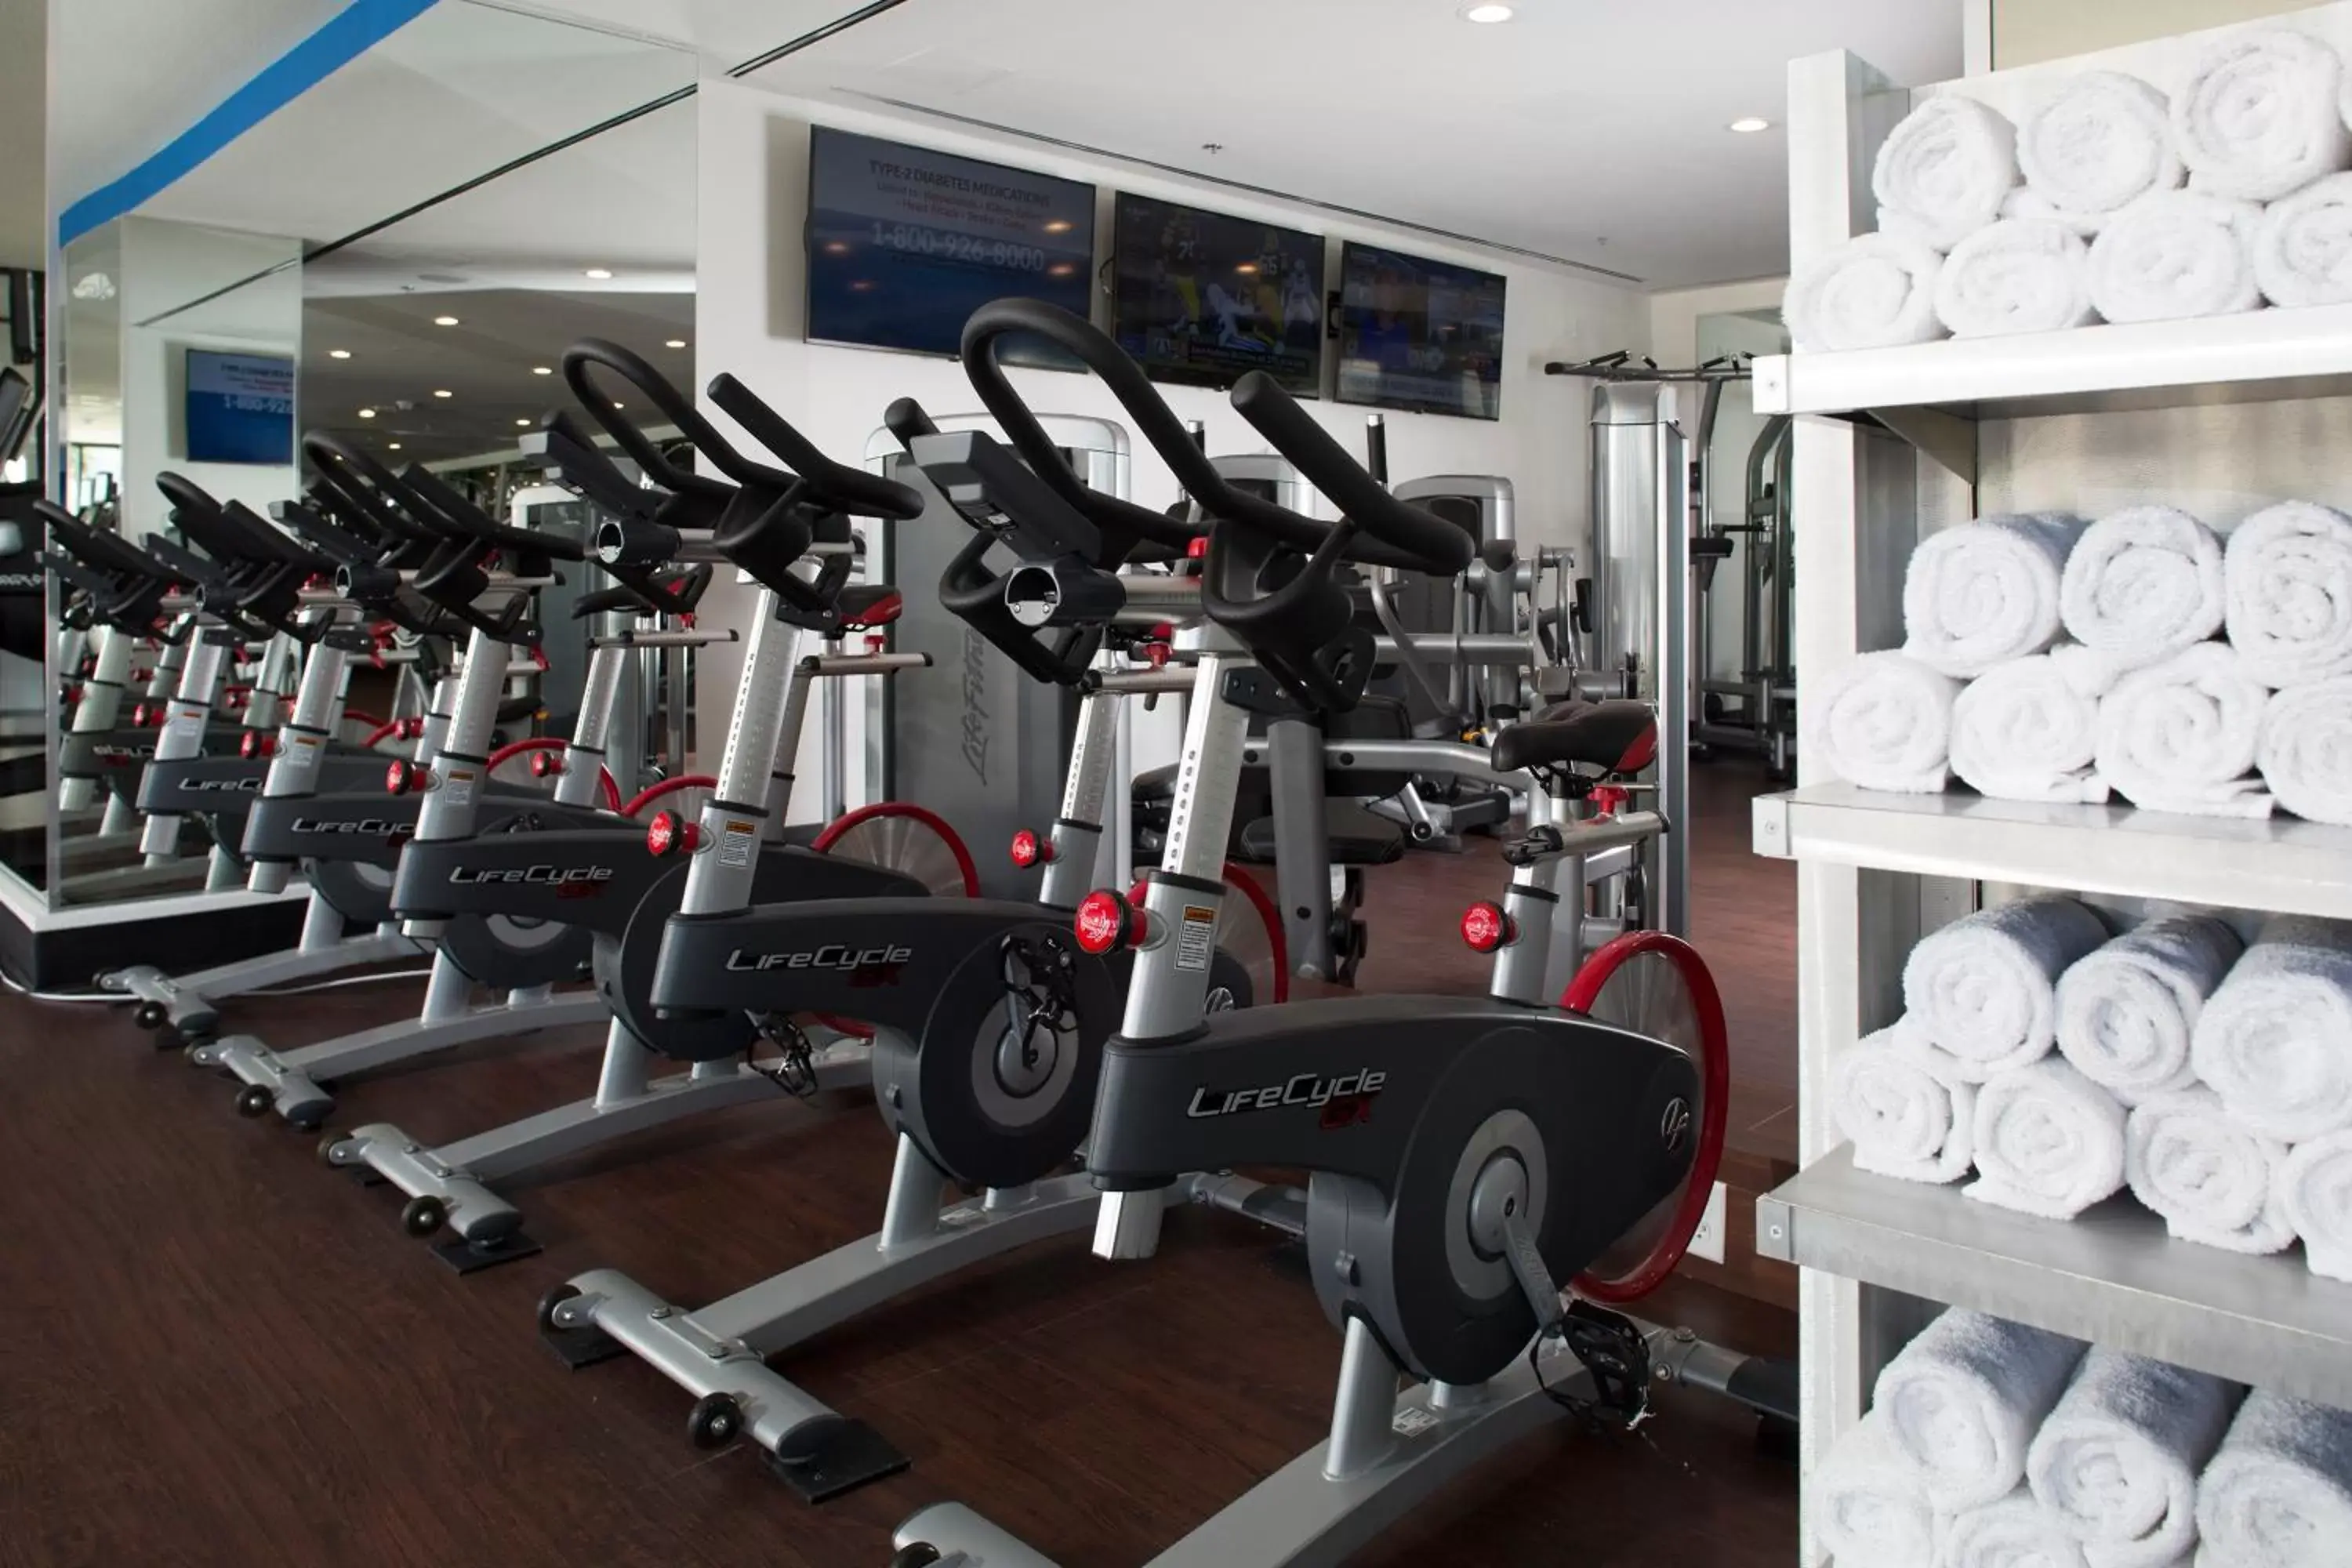 Fitness centre/facilities, Fitness Center/Facilities in Westgate Las Vegas Resort and Casino